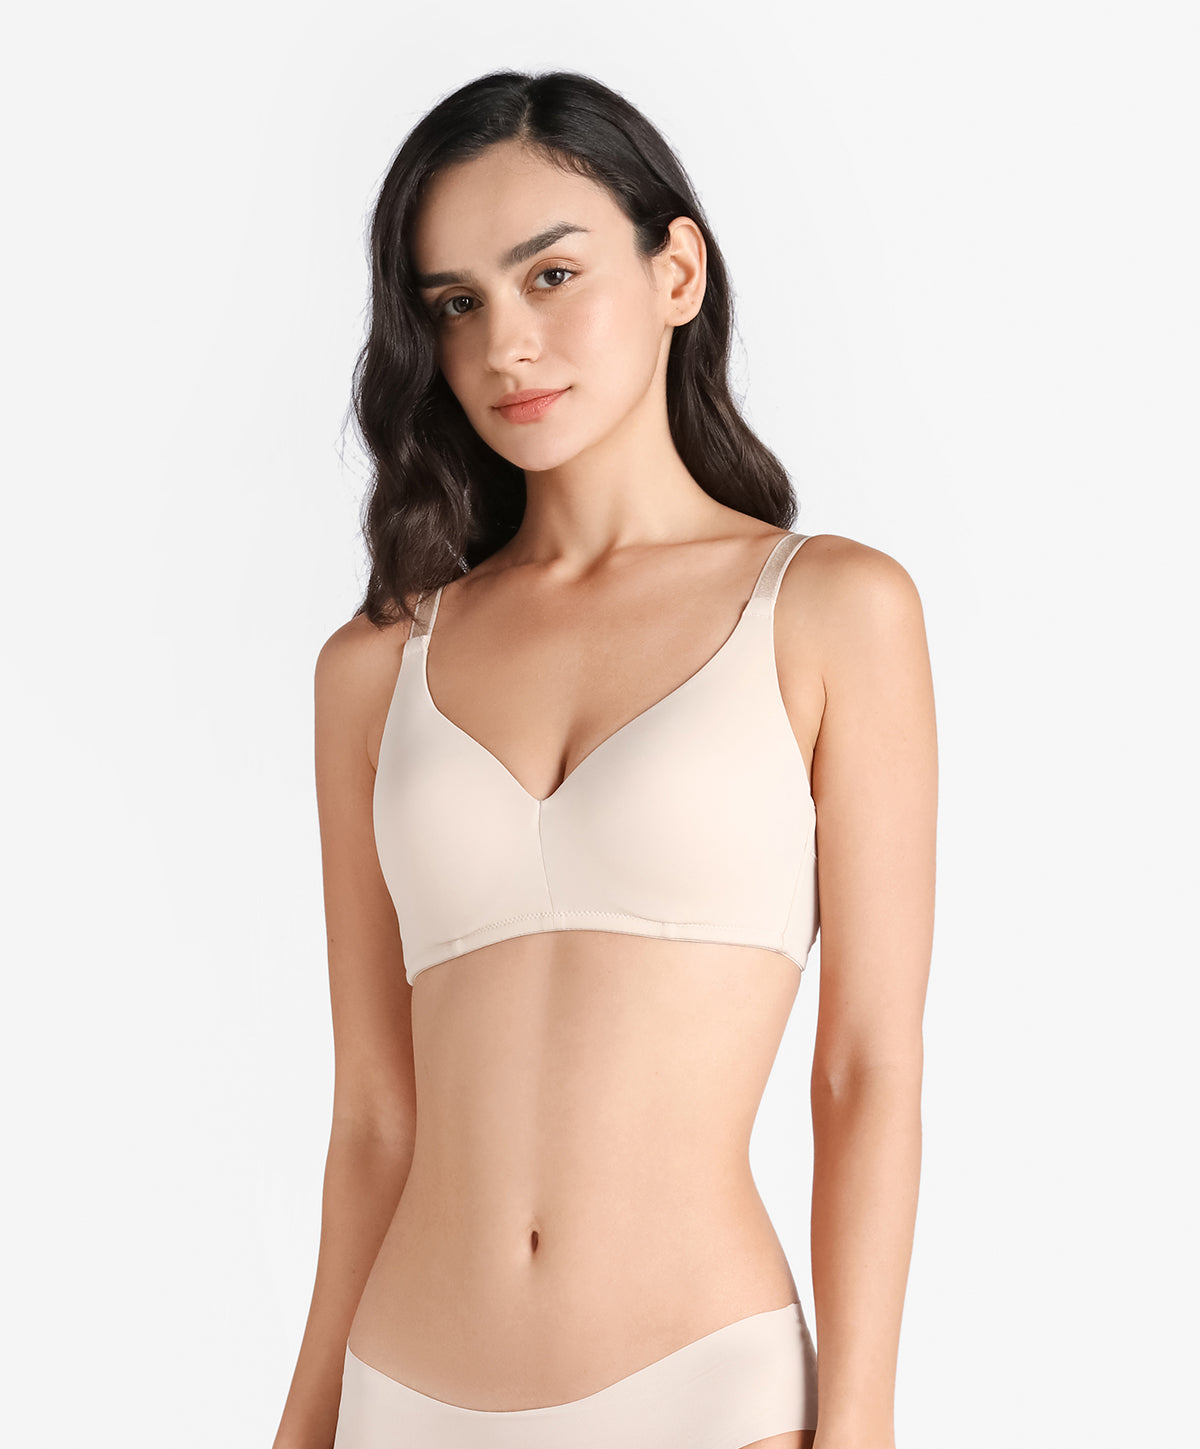 Pierre Cardin Lingerie Malaysia - If you want to wear something